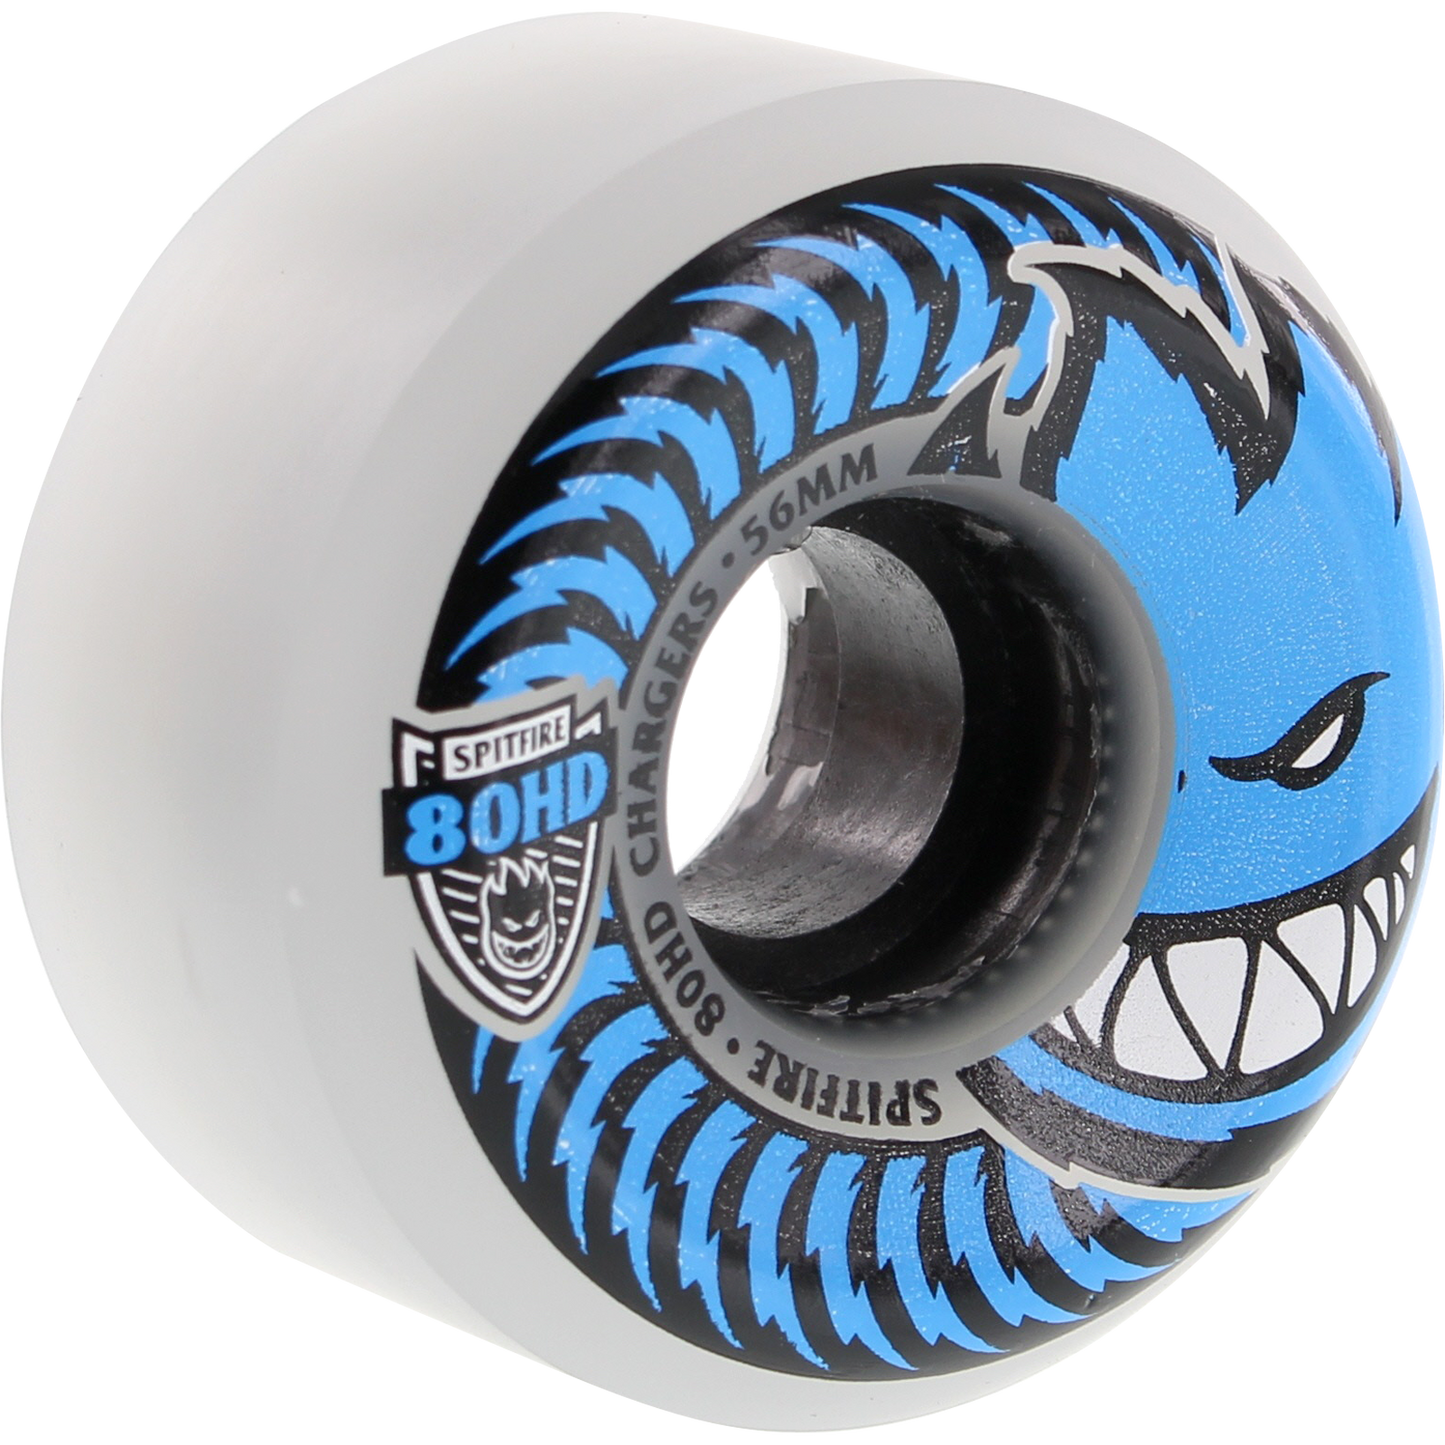 Spitfire 80hd Charger Conical 56mm Clear/Blue Skateboard Wheels (Set of 4)